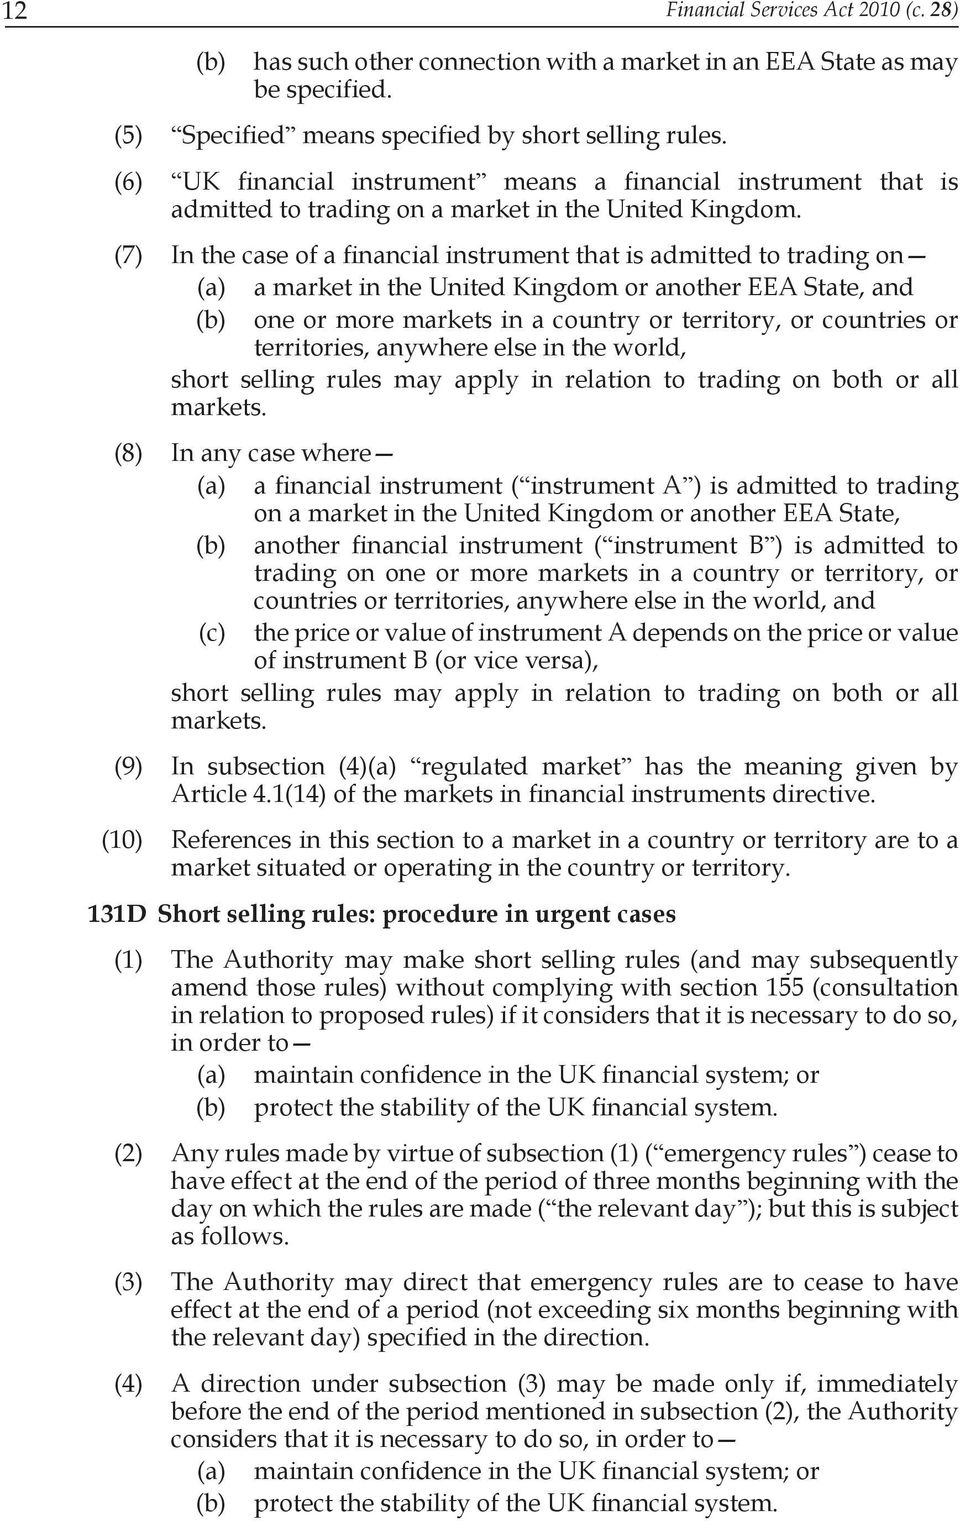 (7) In the case of a financial instrument that is admitted to trading on (a) a market in the United Kingdom or another EEA State, and (b) one or more markets in a country or territory, or countries